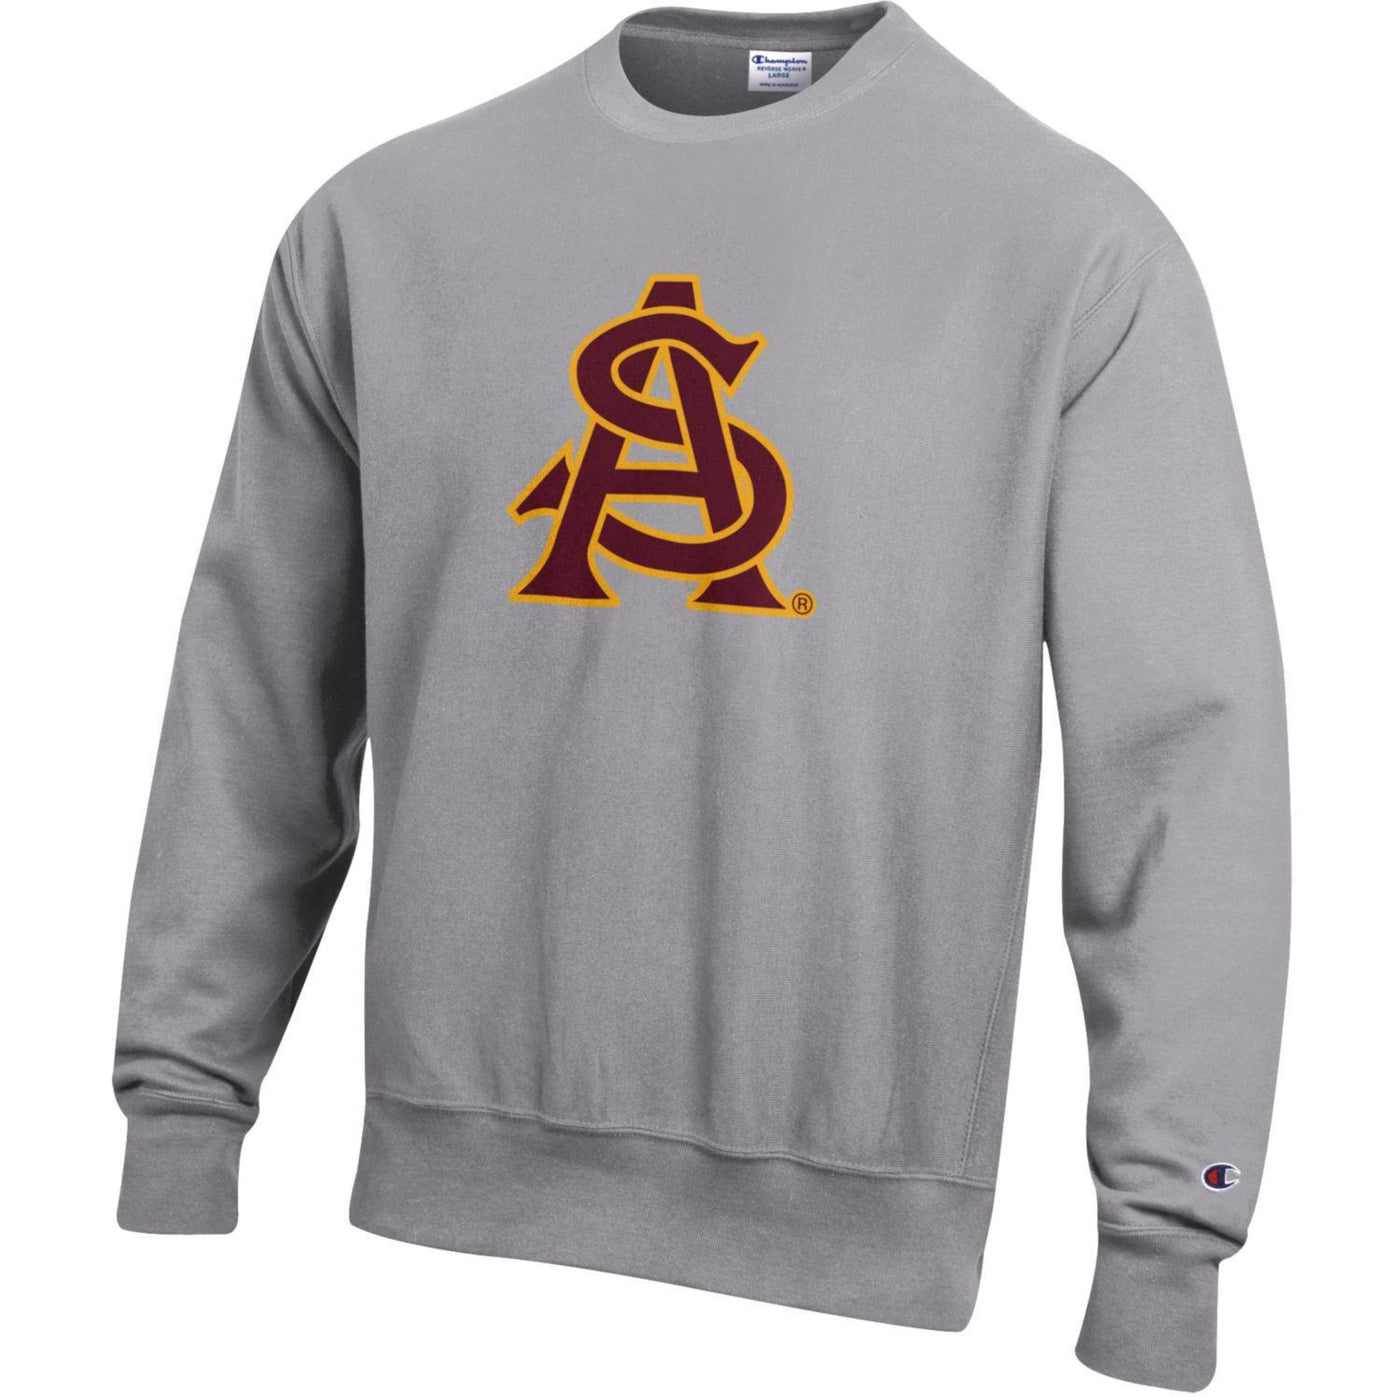 ASU gray reverse weave crew neck with an interlocking 'A' and 'S' print on the chest